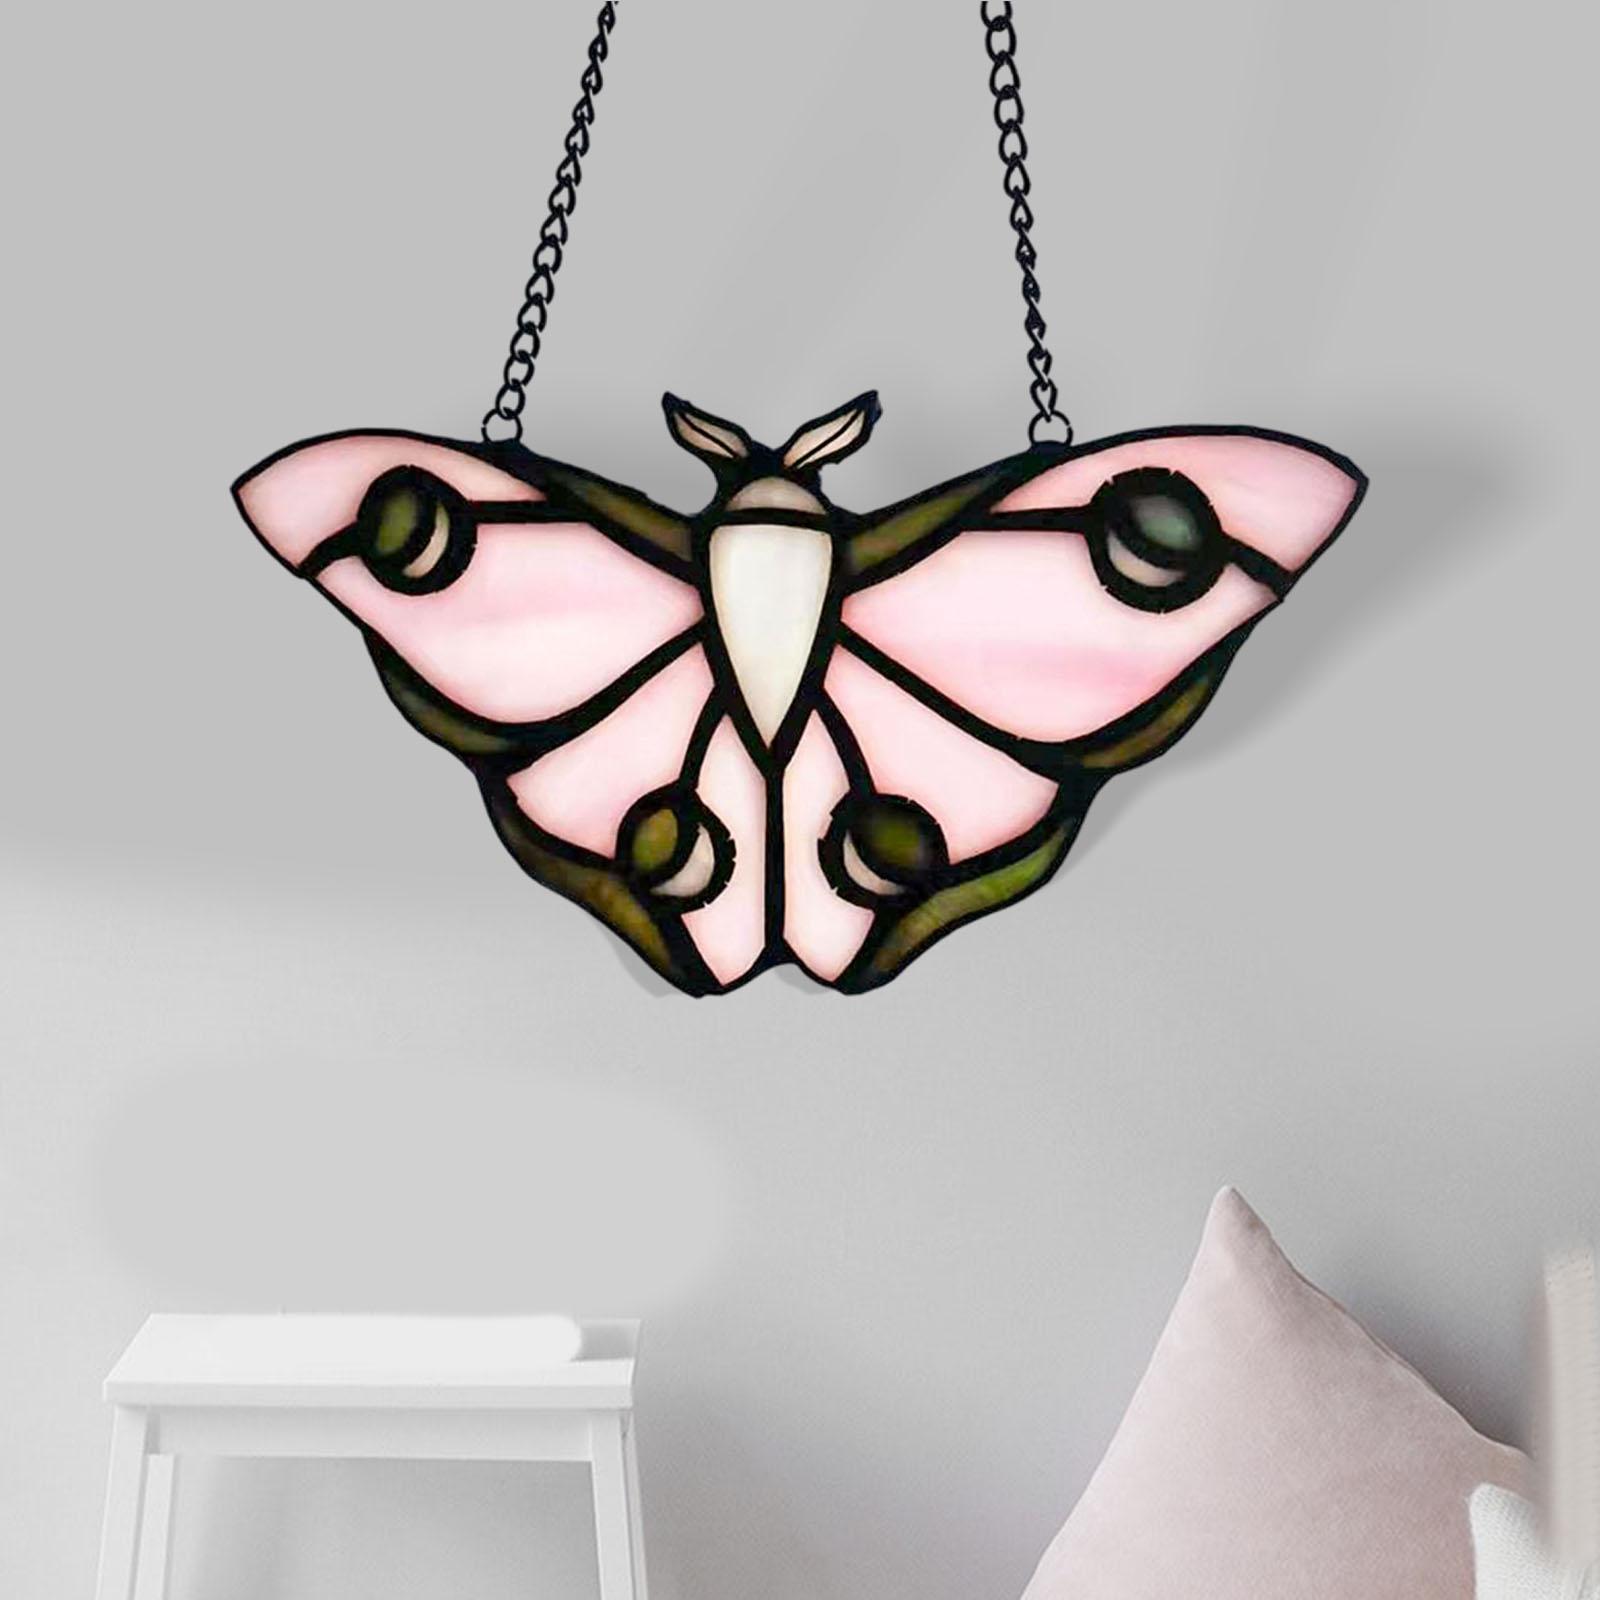 Stained Glass Window Hangings Panel Butterfly Handcrafted for Decoration